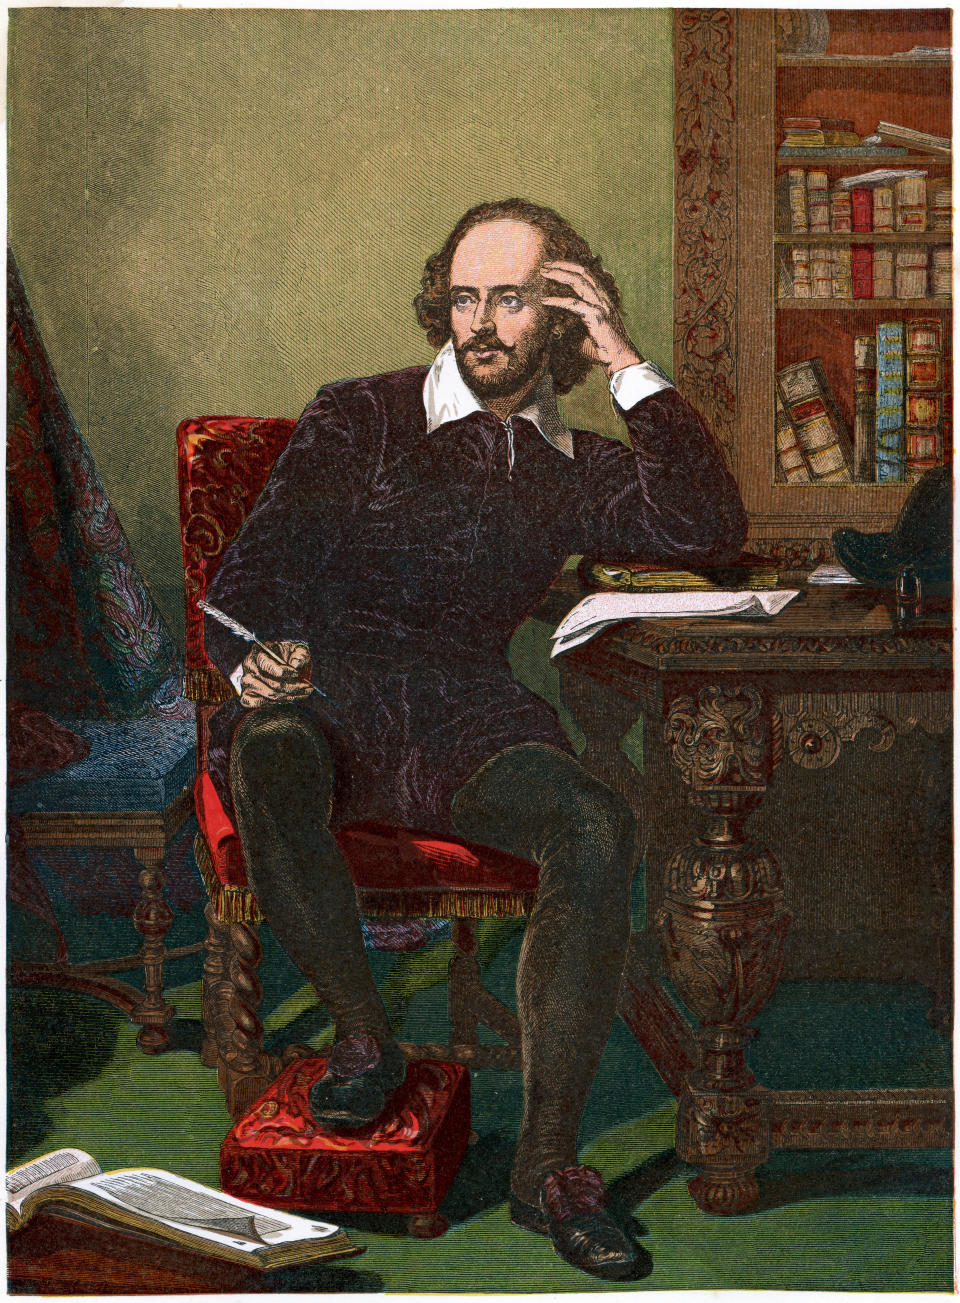 Vintage colour lithograph from 1853 of William Shakespeare, an English poet and playwright, widely regarded as the greatest writer in the English language and the world's pre-eminent dramatist.